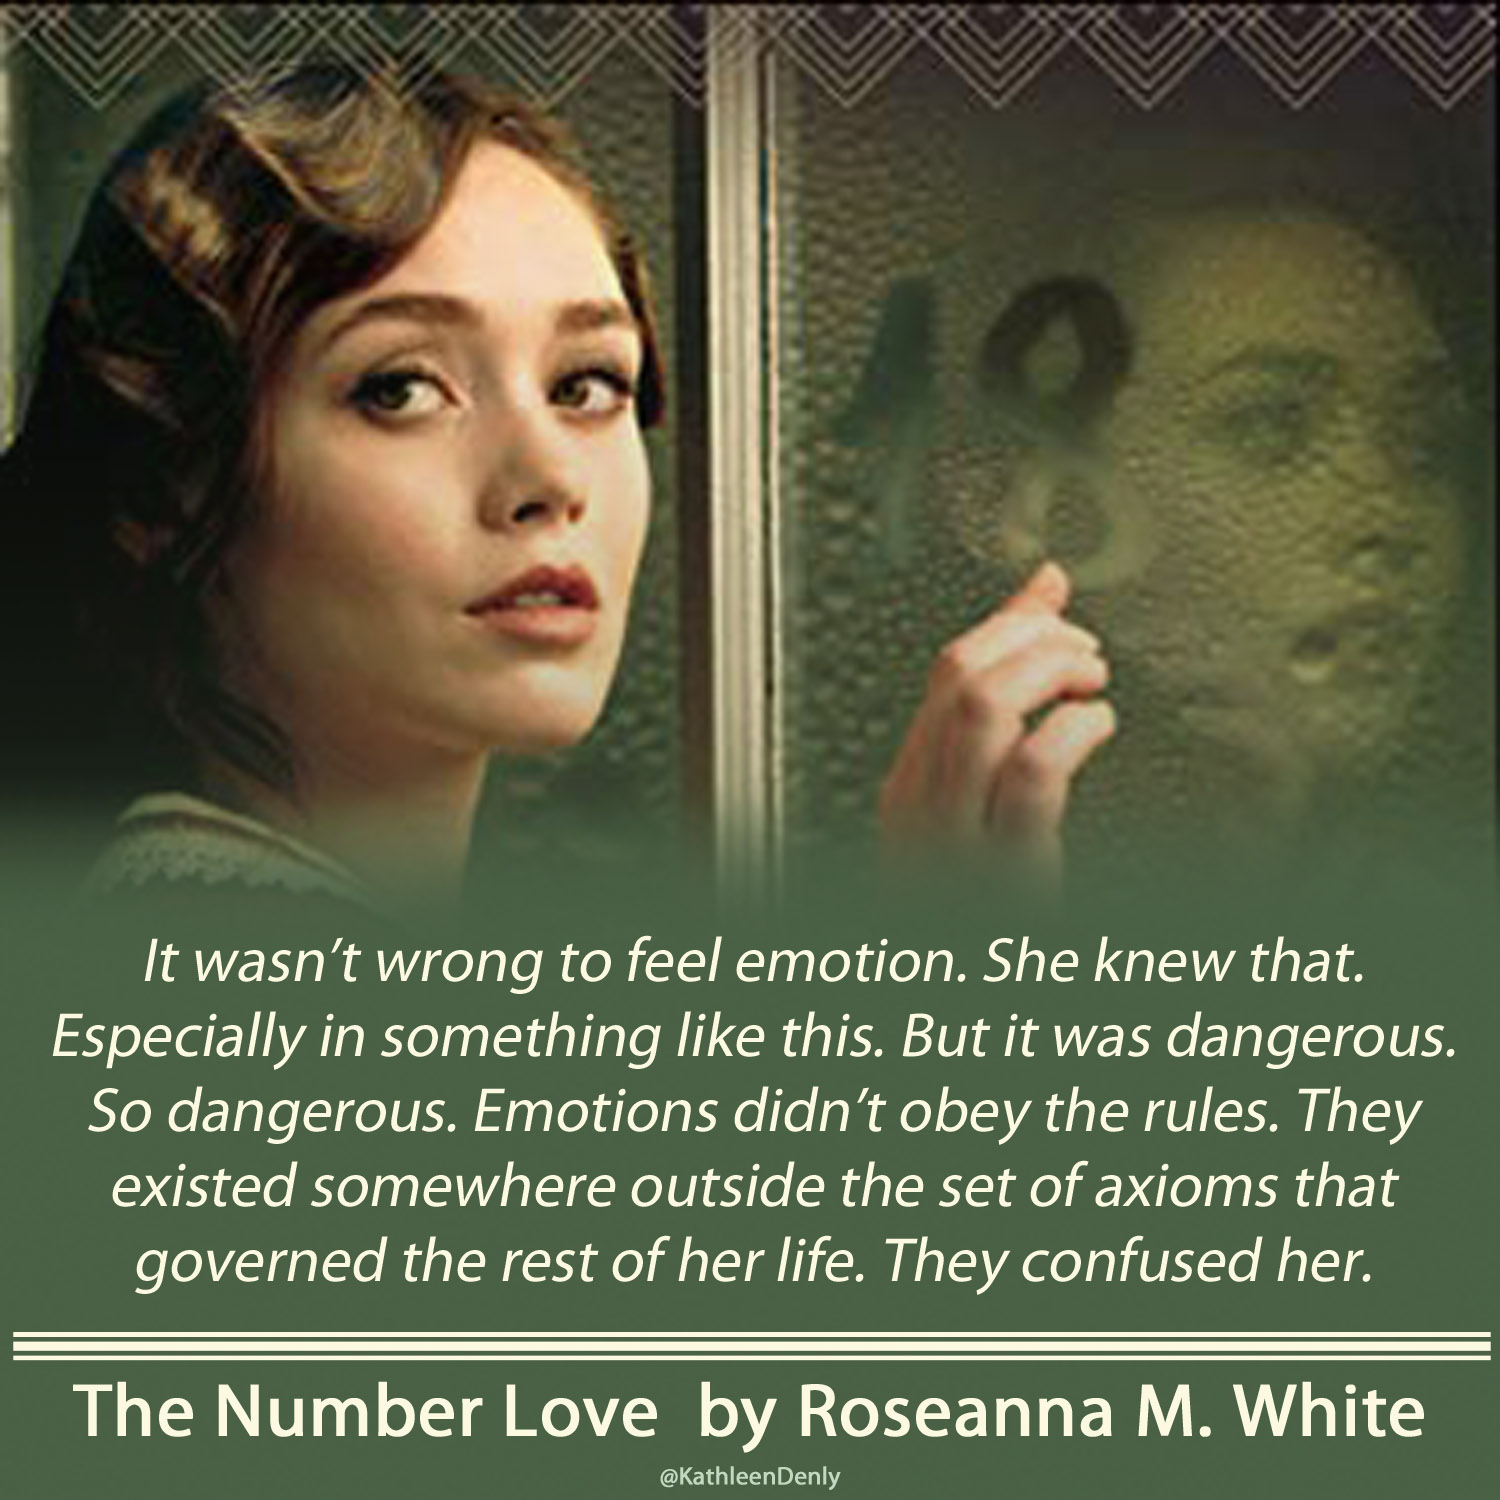 Book Quote - The Number of Love